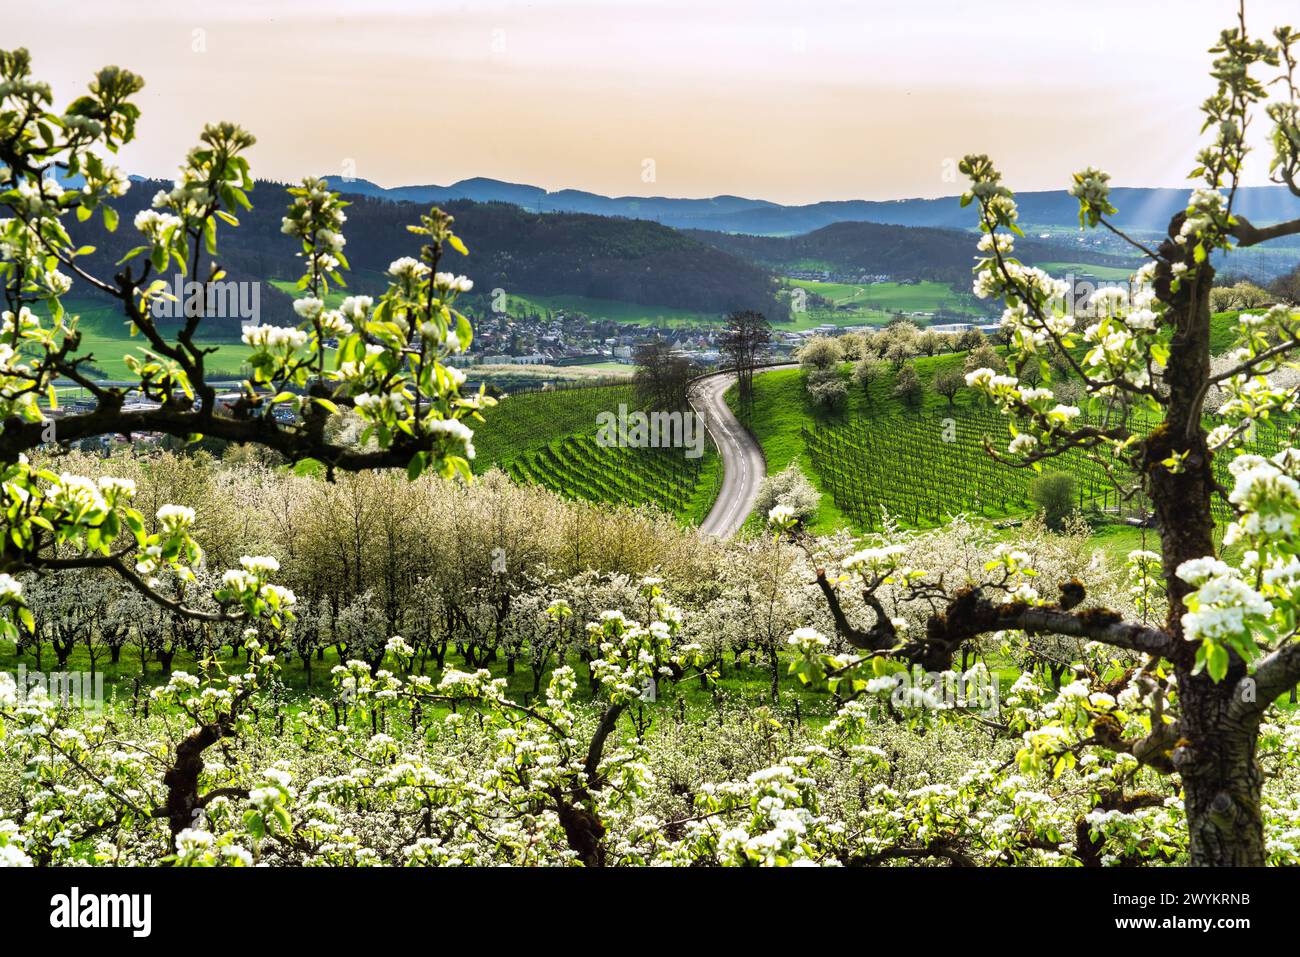 Switzerland, Europe, Baselland, Baselbiet, Oberbaselbiet, Sissach, Sissach BL, BL, cherry plantation, cherry blossom, spring, April, orchard, cherry t Stock Photo